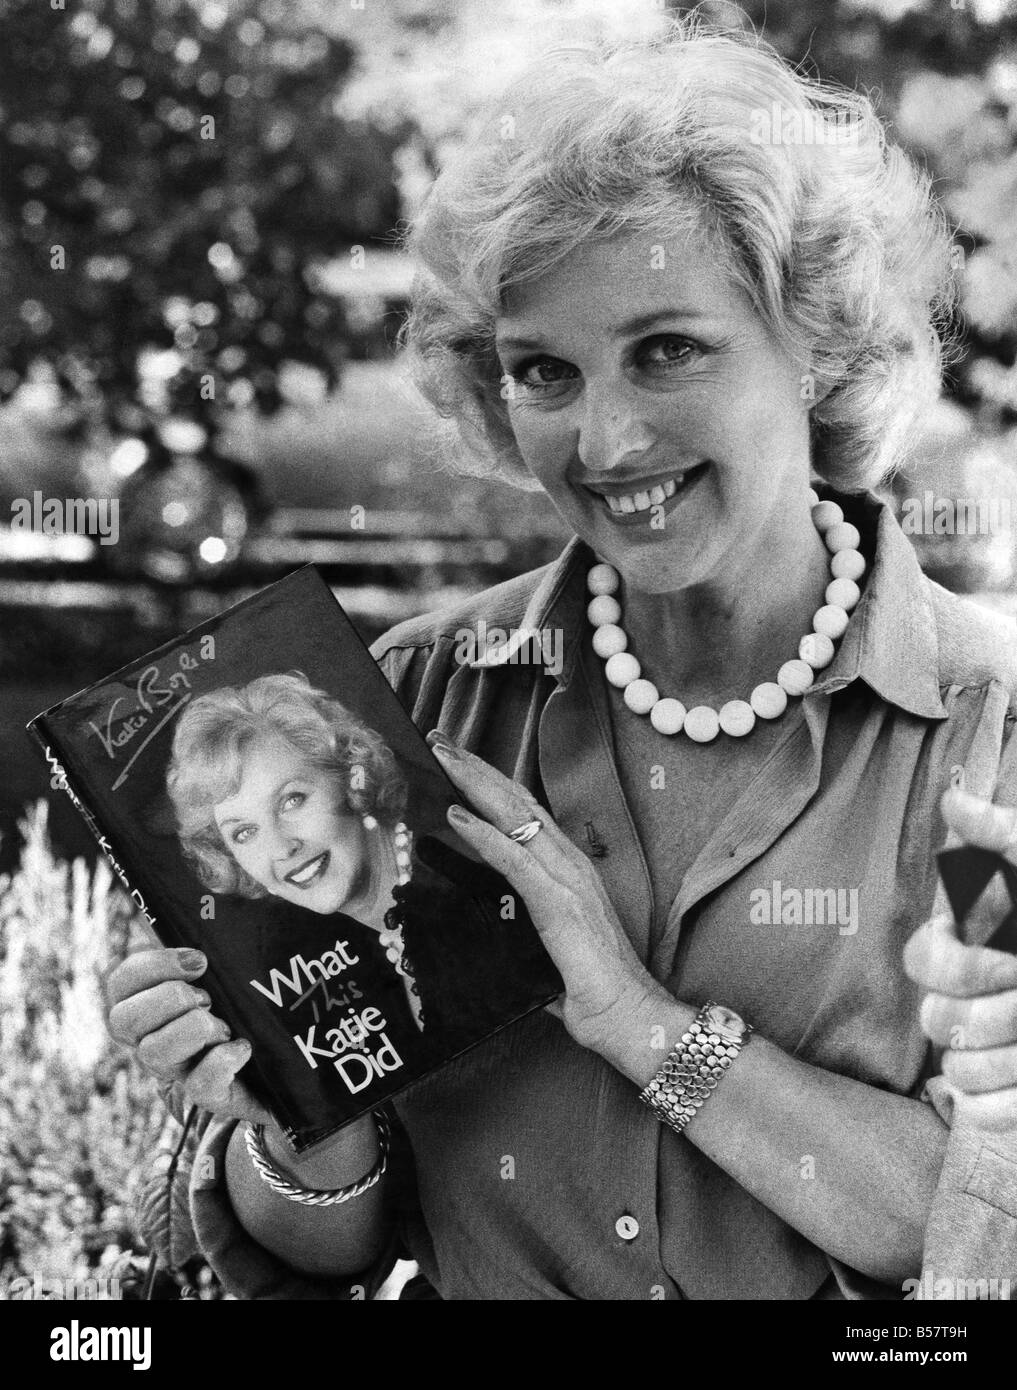 It's over 25 years now, believe it or not, that the stunningly lovely face of Katie Boyle has been smiling at us on our television screens-from advertising soap to presenting multilingual Eurovision Song Contests. ;September 1980 ;P003831 Stock Photo